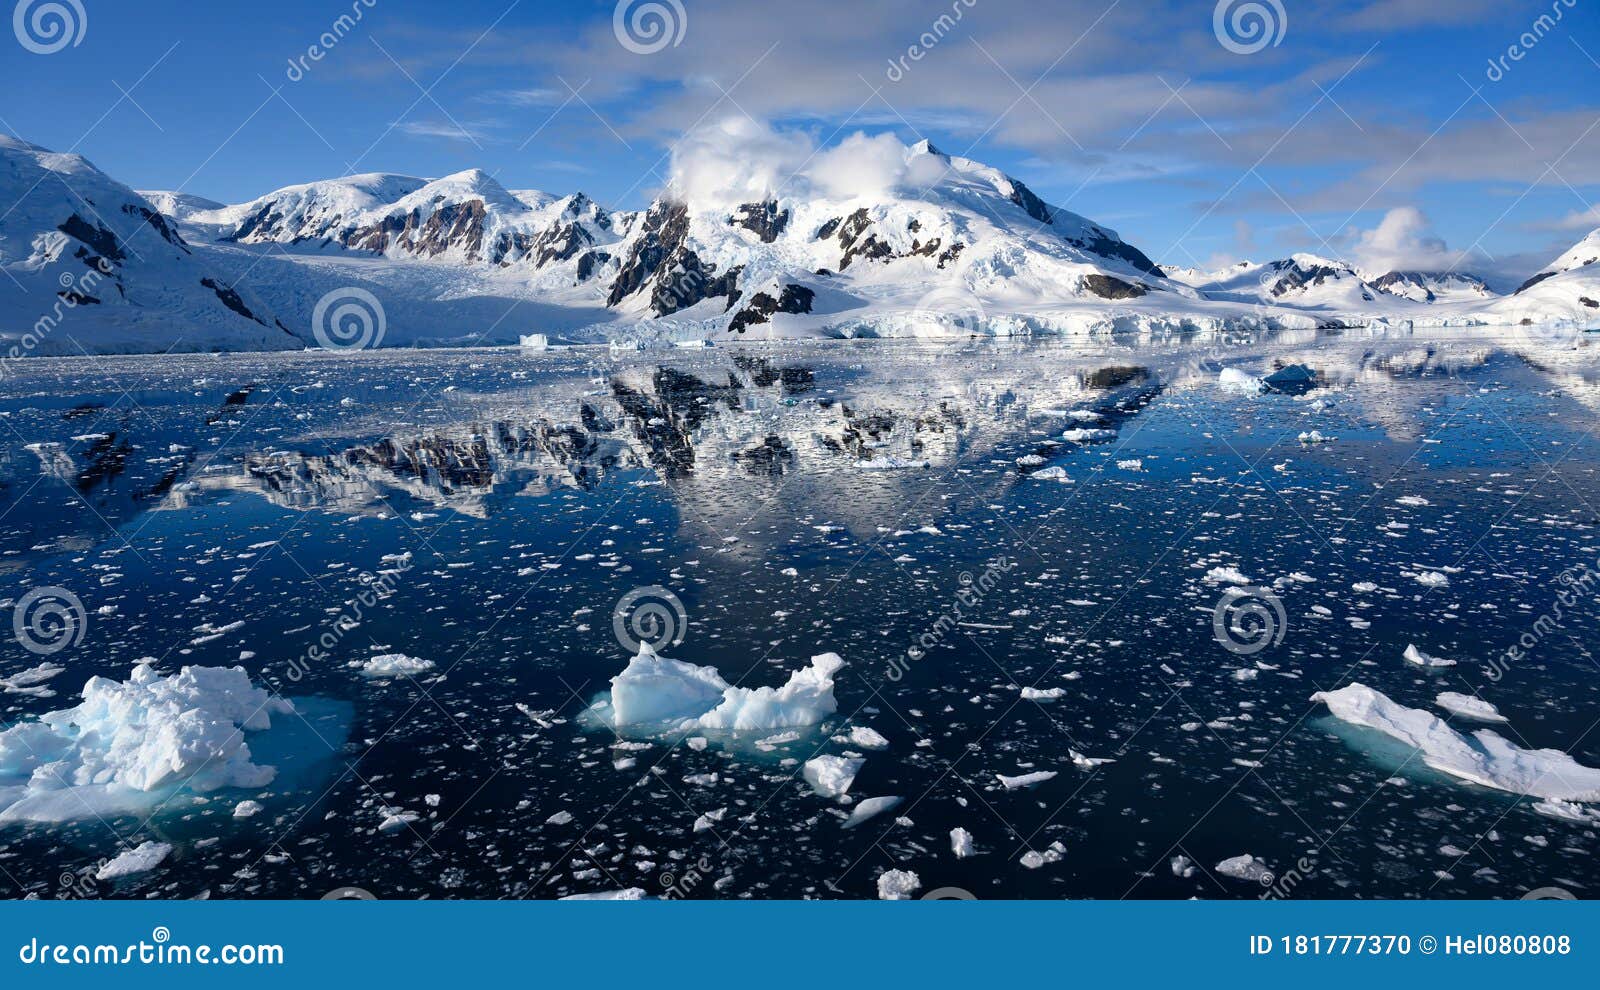 snowcapped mountains in beautiful landscape, reflecting in blue water, ice flows, lemaire channel near paradise bay, antarctica